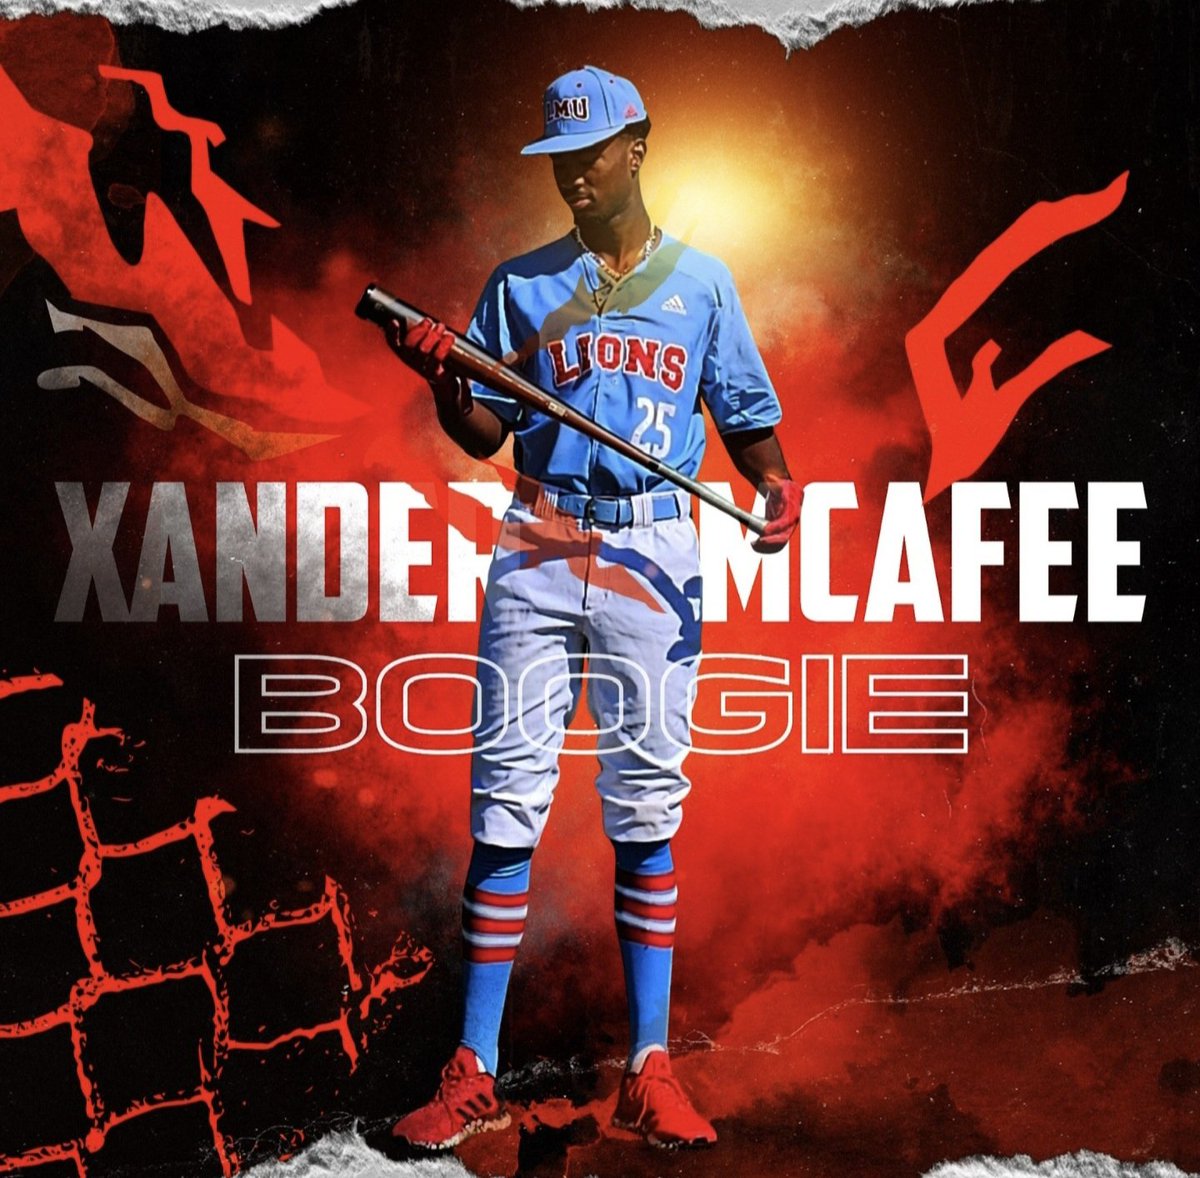 Big shout out to @r3_ethan for creating some great posters for Xander. Truly grateful for his journey. He is a better version of himself each day. He is just getting started. God's plan. God is so good, all the time 💯 @lmulionsBSB @mccbaseball1 @xander37105449